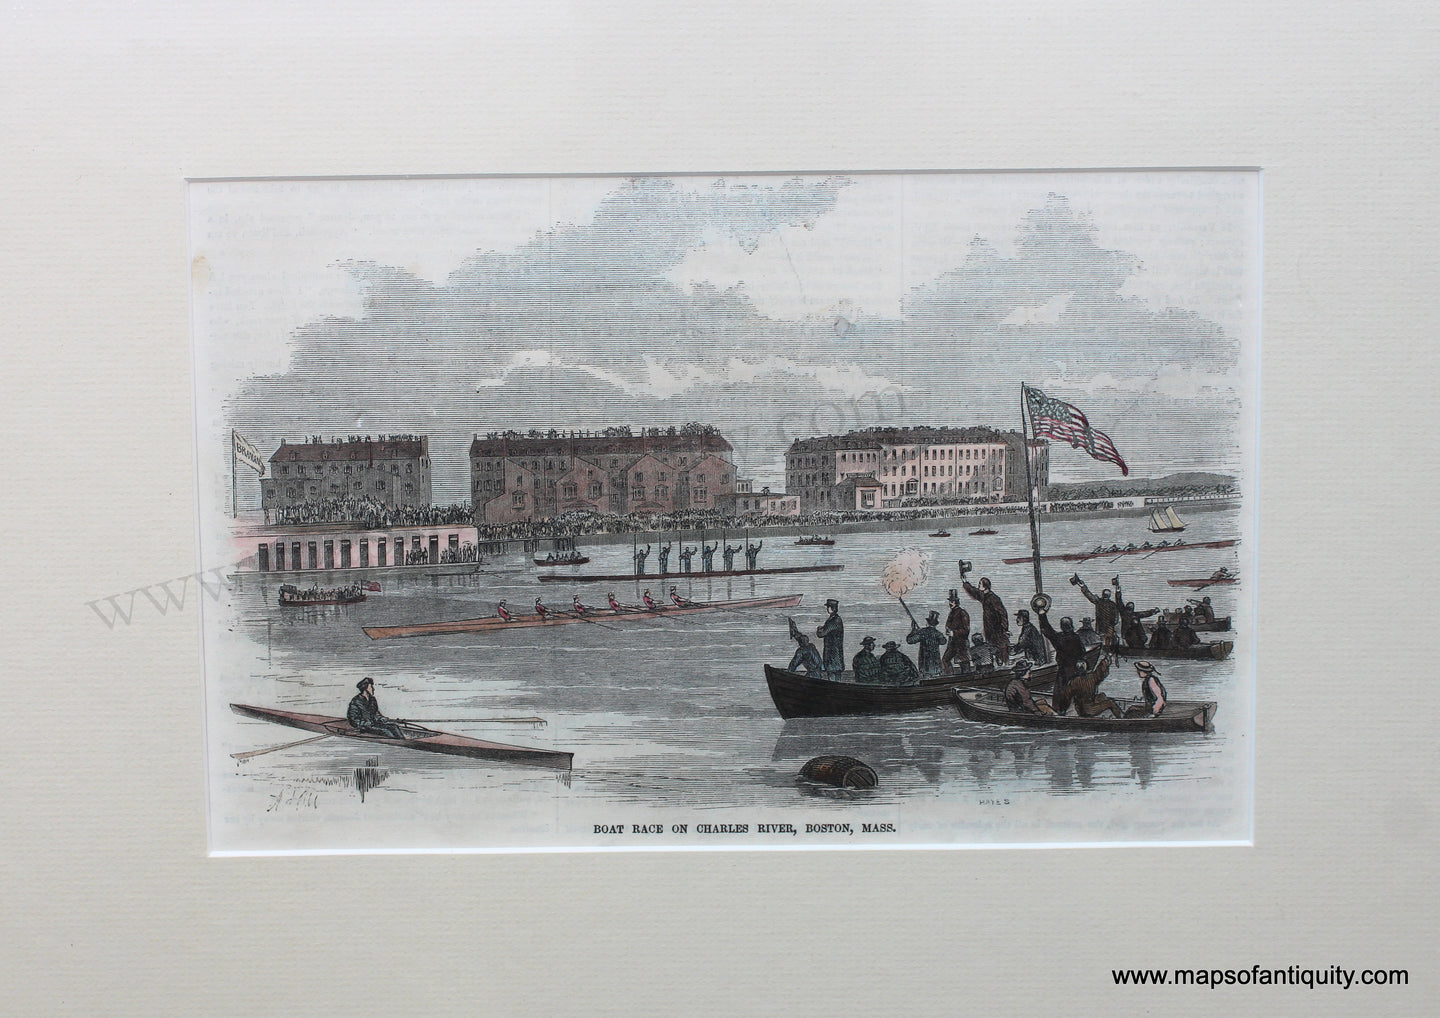 Genuine-Hand-Colored-Antique-Print-Boat-Race-on-Charles-River-Boston-Mass.-1857-Ballou's-Pictorial-Maps-Of-Antiquity- Crew